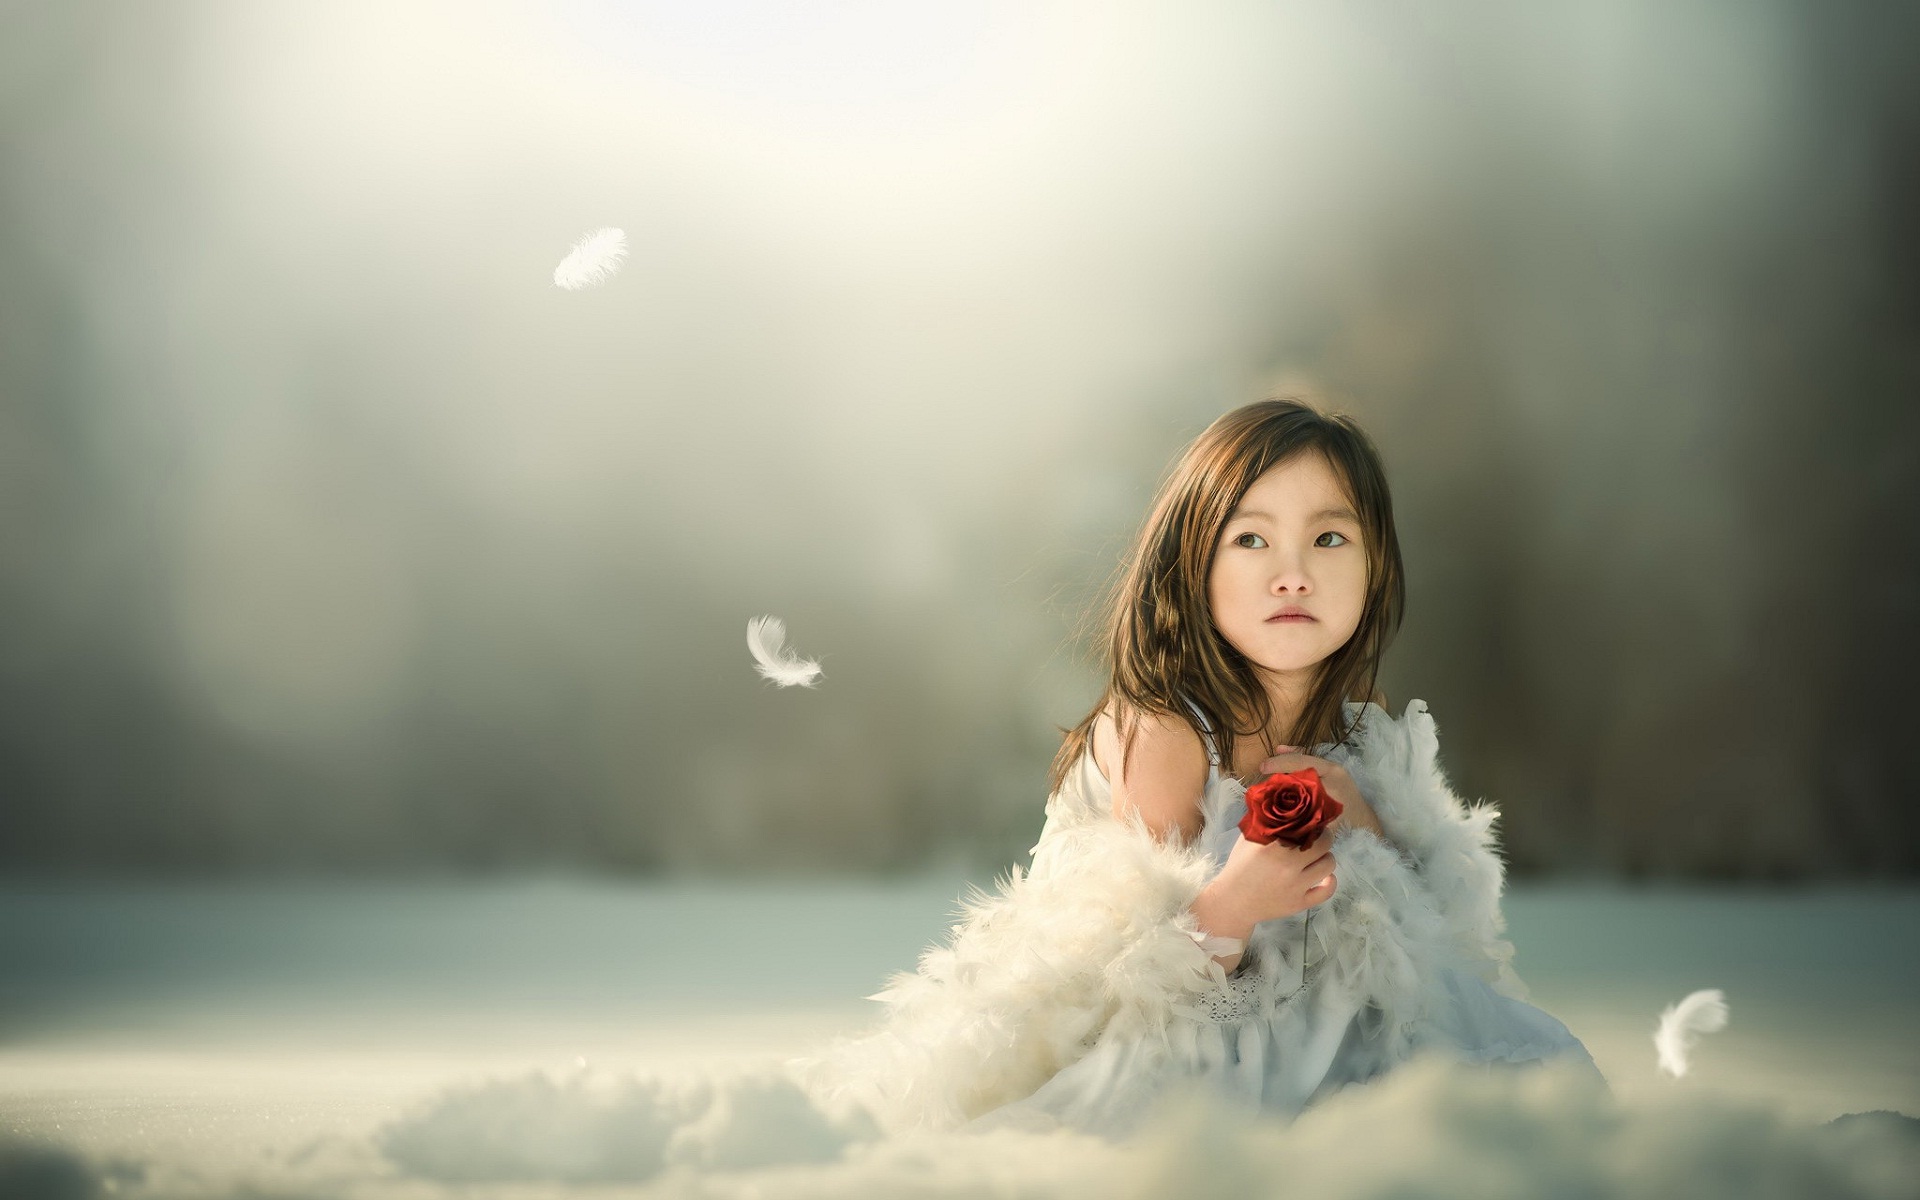 Innocent sad mood cute small girl with red rose